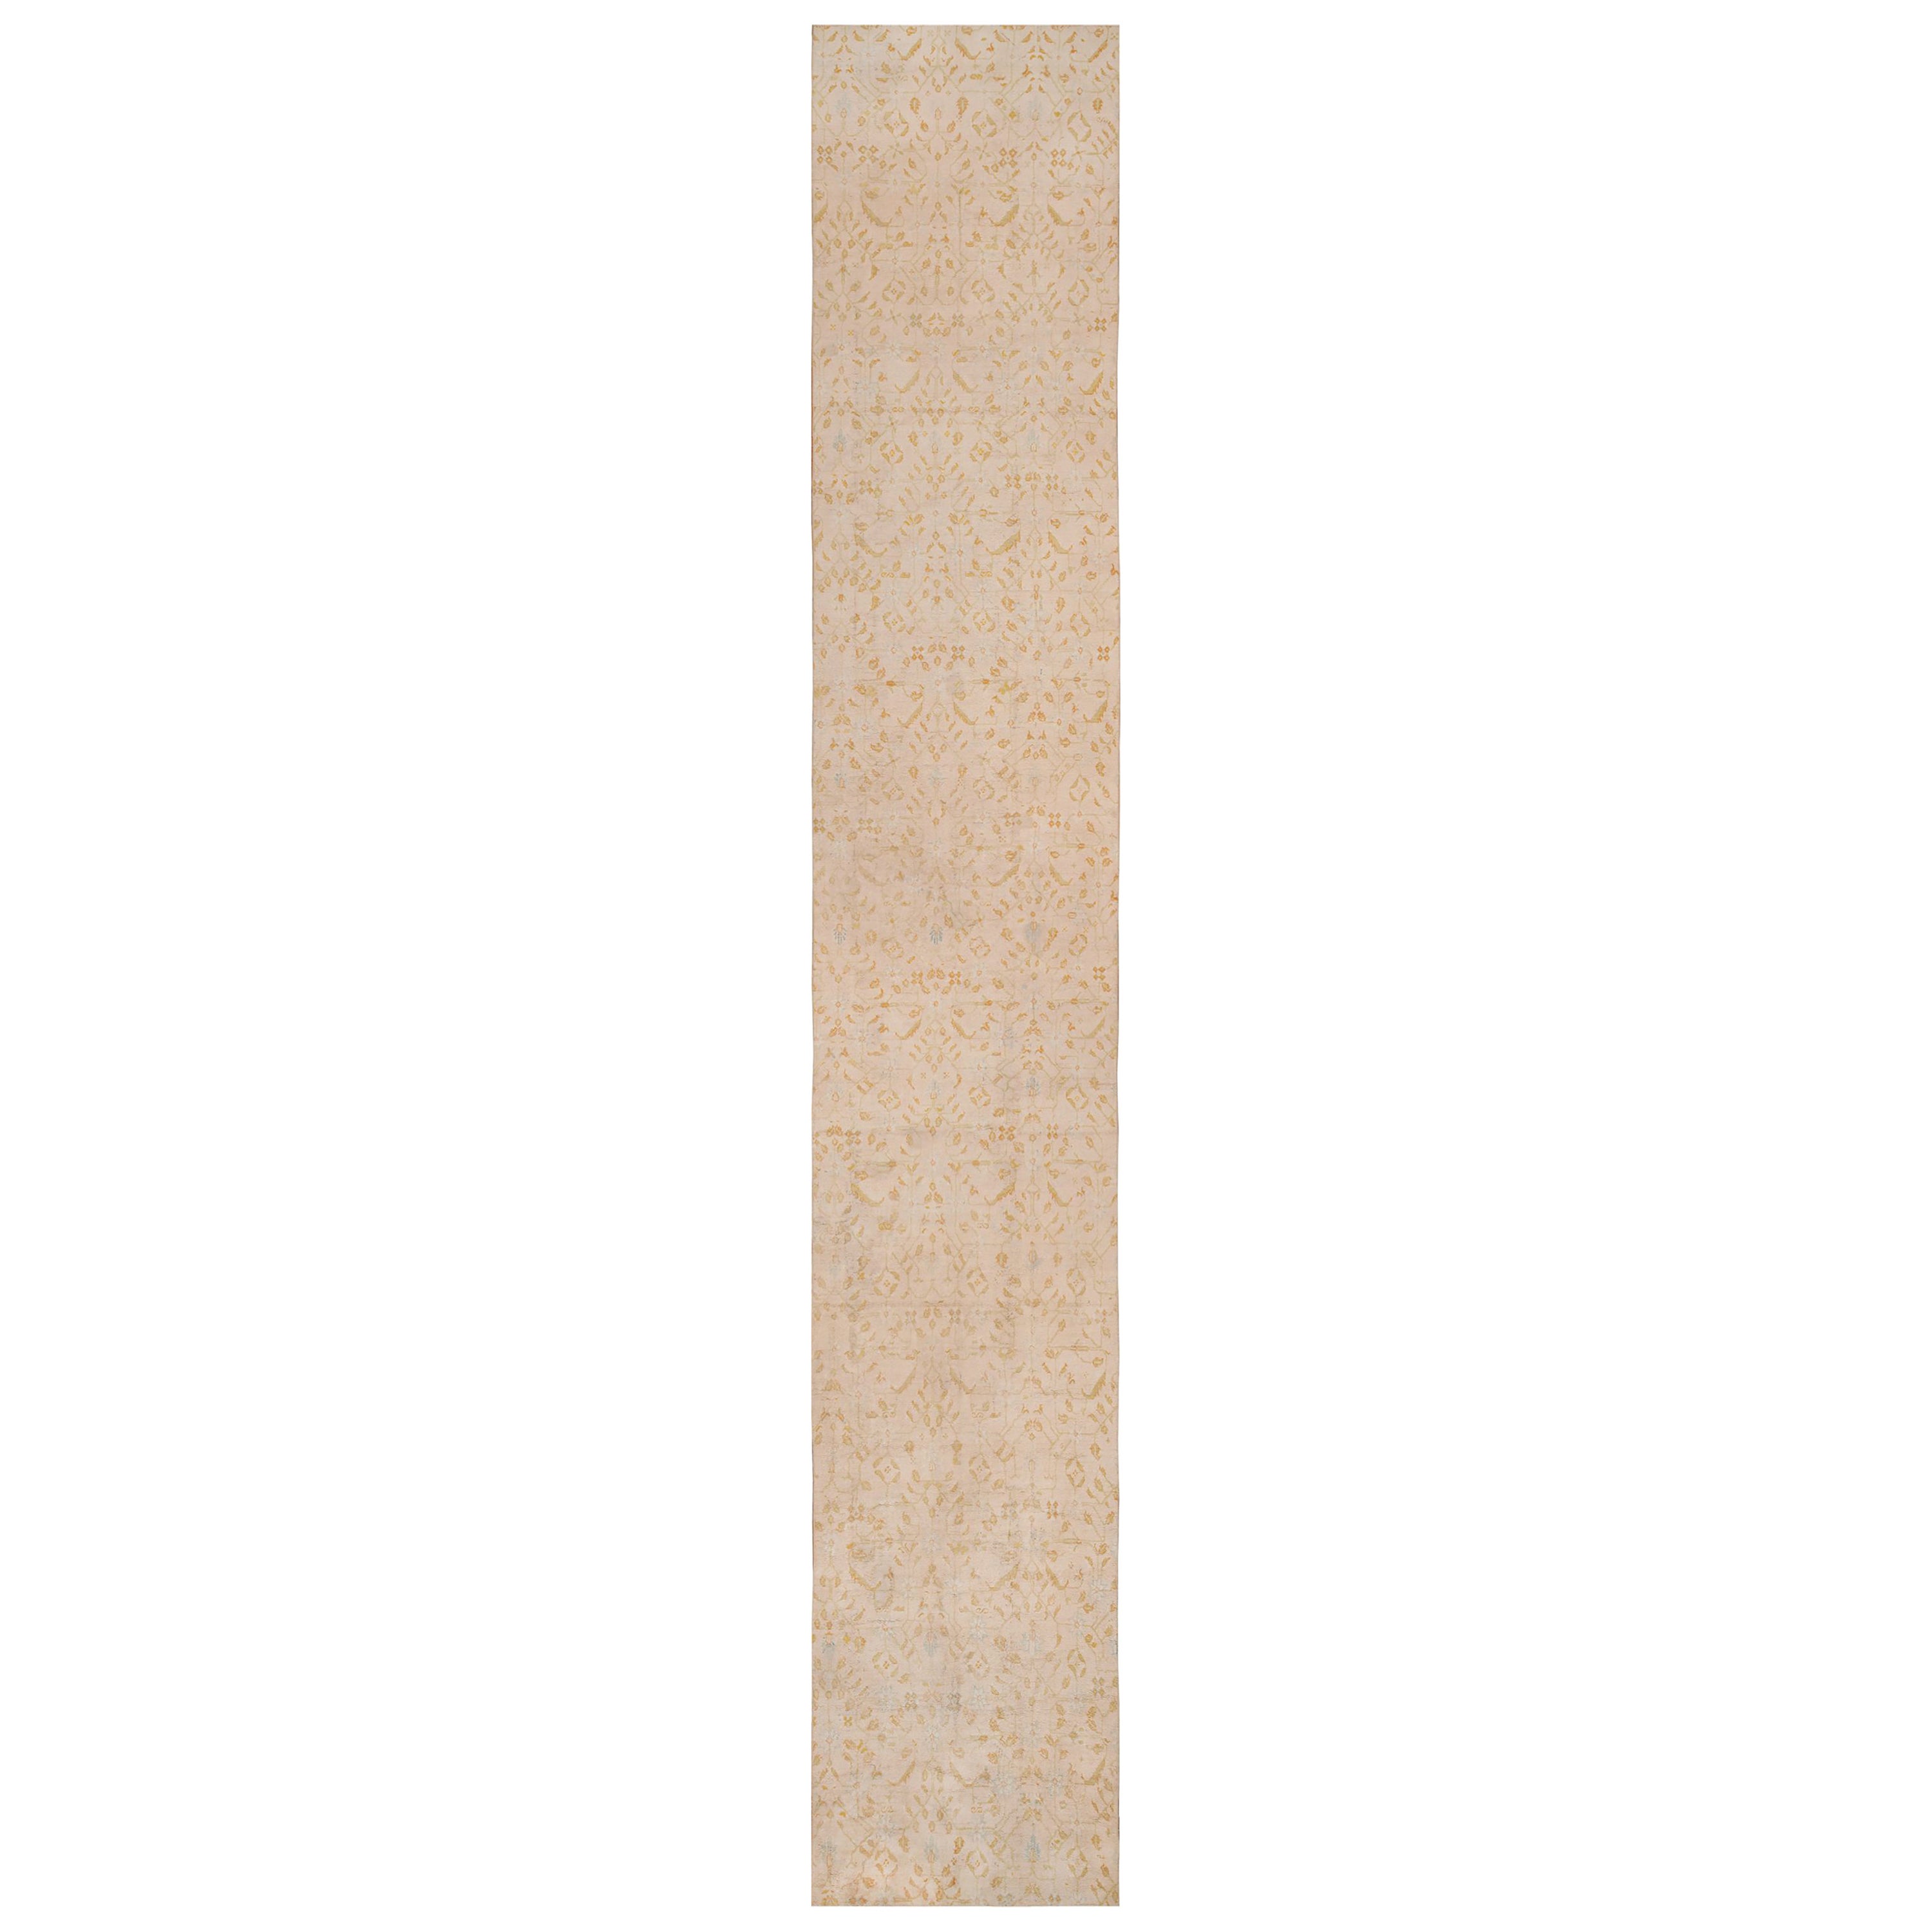 Long and Narrow Luxurious Ivory Indian Agra Antique Runner Rug 4'6" x 26'6" For Sale